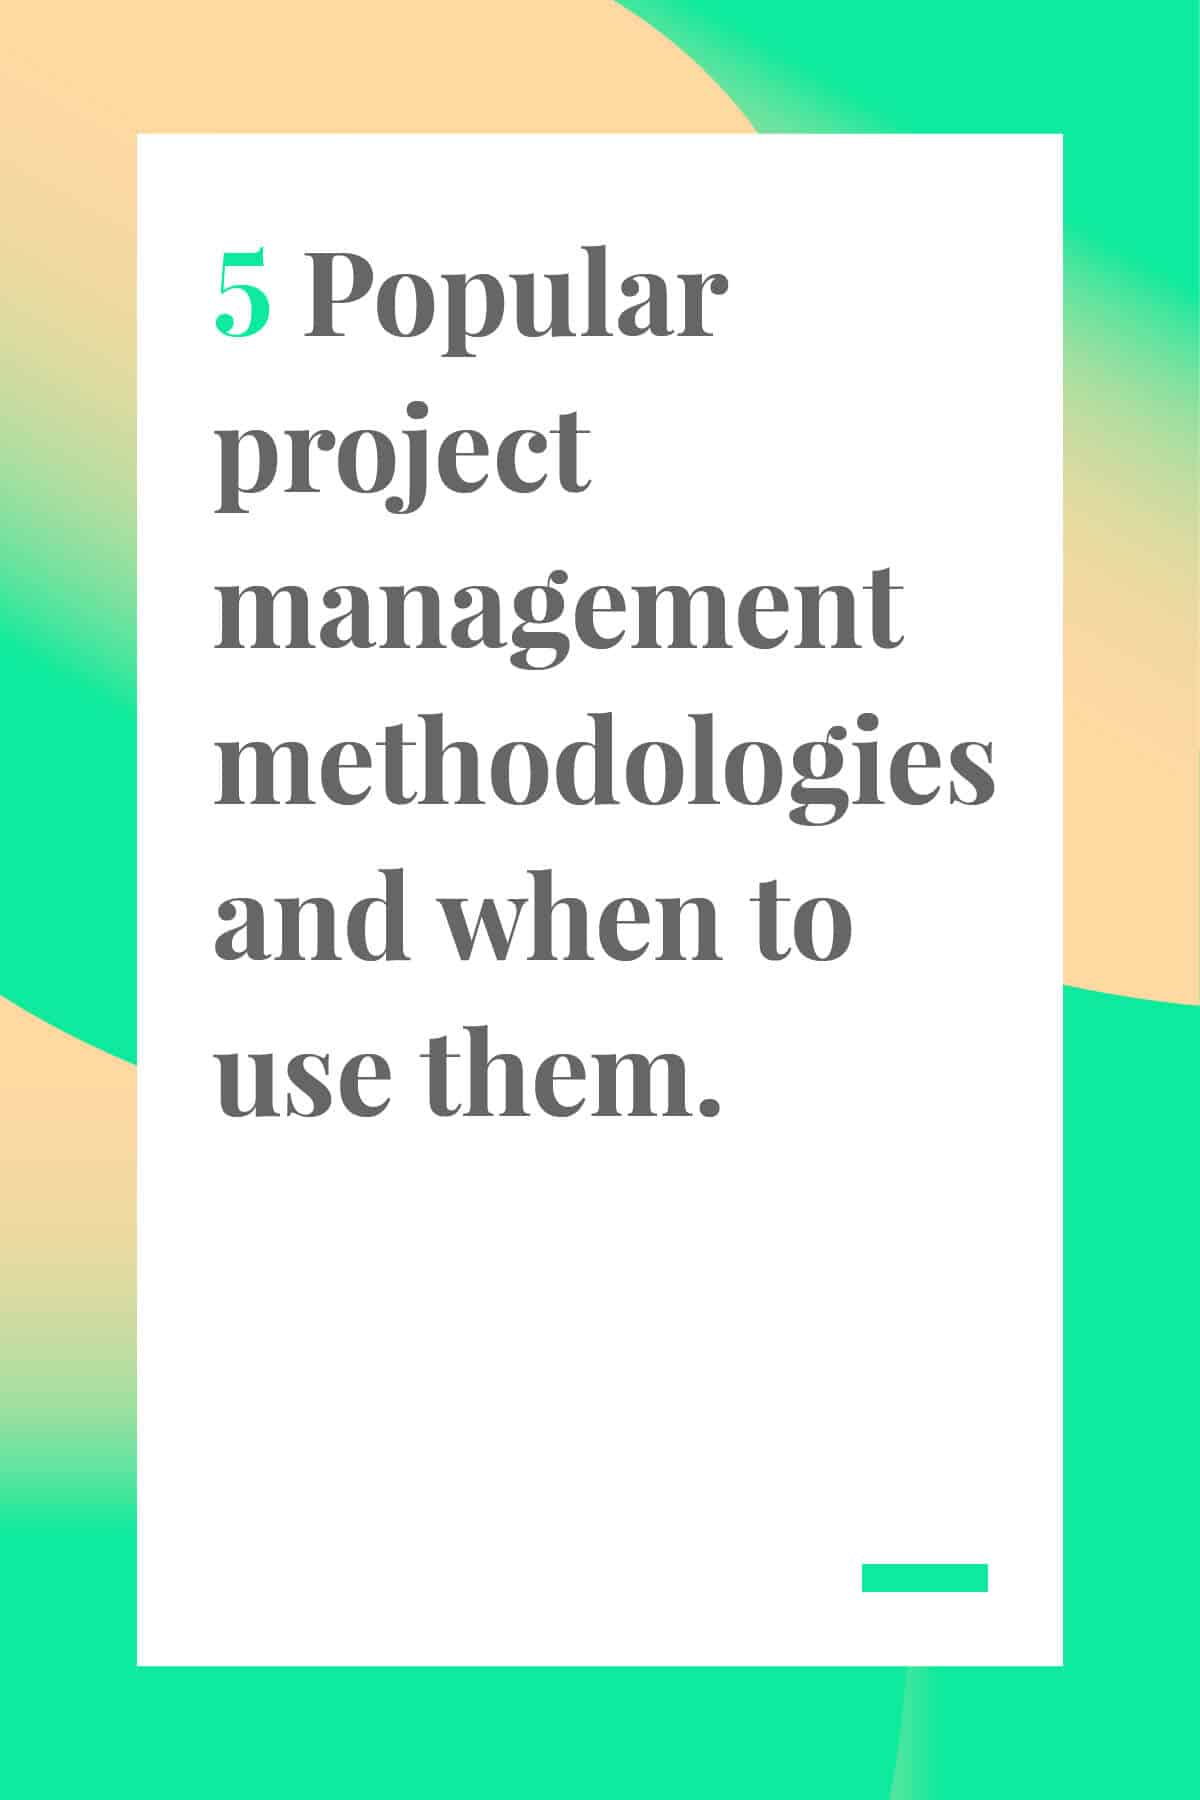 Confused about all the different project management methodologies out there? We've got you covered with this review of five of the most popular project management methodologies, including Agile, Kanban, and Six Sigma, plus advice on when to use each. #agile #projectmanagement #scrum